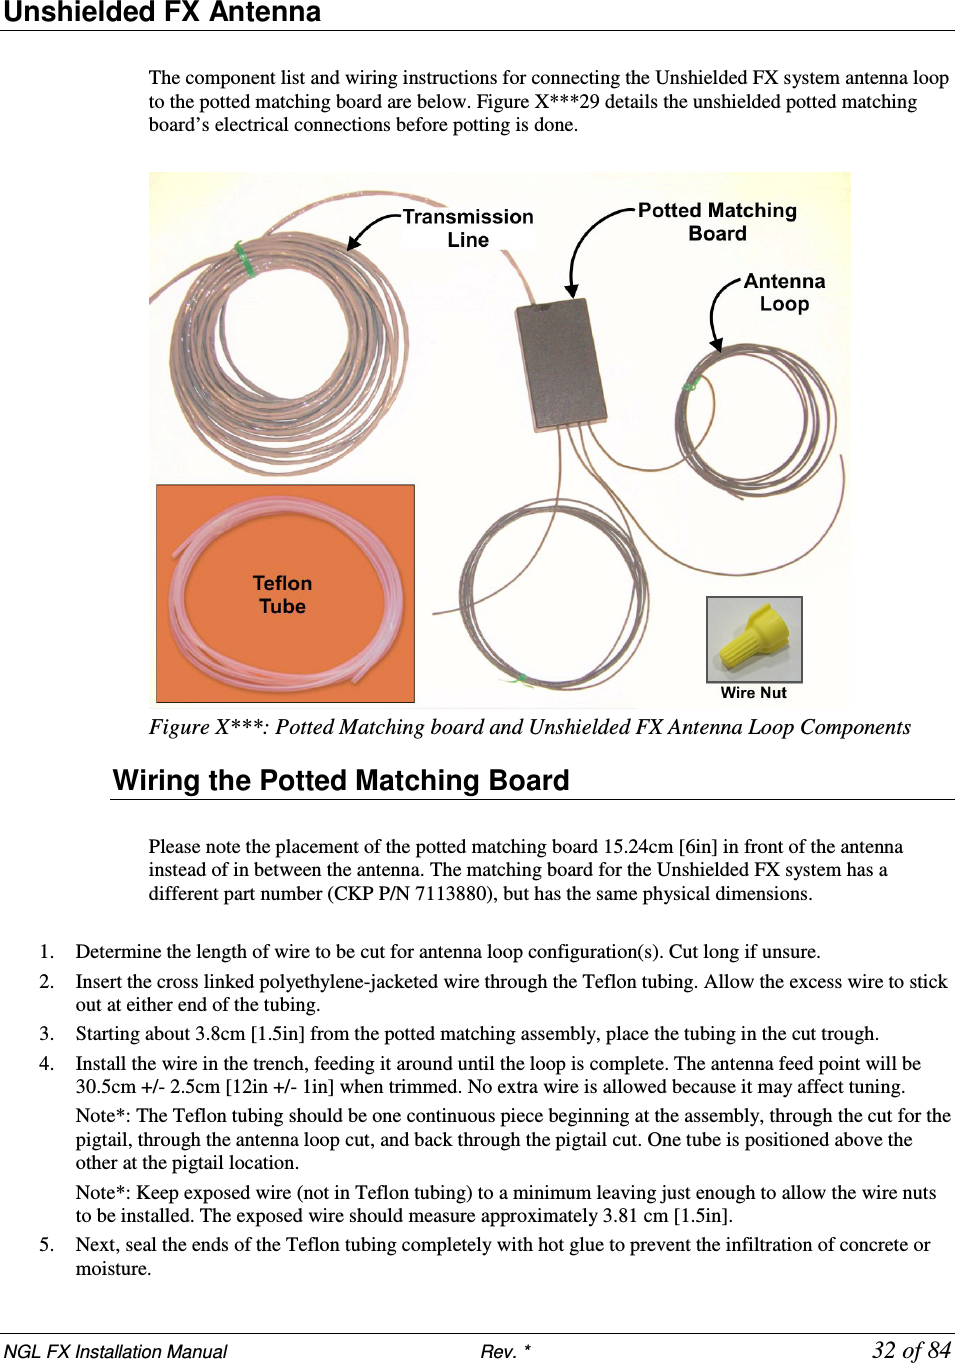 NGL FX Installation Manual                           Rev. *            32 of 84 Unshielded FX Antenna  The component list and wiring instructions for connecting the Unshielded FX system antenna loop to the potted matching board are below. Figure X***29 details the unshielded potted matching board’s electrical connections before potting is done.   Figure X***: Potted Matching board and Unshielded FX Antenna Loop Components Wiring the Potted Matching Board  Please note the placement of the potted matching board 15.24cm [6in] in front of the antenna instead of in between the antenna. The matching board for the Unshielded FX system has a different part number (CKP P/N 7113880), but has the same physical dimensions.  1. Determine the length of wire to be cut for antenna loop configuration(s). Cut long if unsure. 2. Insert the cross linked polyethylene-jacketed wire through the Teflon tubing. Allow the excess wire to stick out at either end of the tubing.  3. Starting about 3.8cm [1.5in] from the potted matching assembly, place the tubing in the cut trough.  4. Install the wire in the trench, feeding it around until the loop is complete. The antenna feed point will be 30.5cm +/- 2.5cm [12in +/- 1in] when trimmed. No extra wire is allowed because it may affect tuning.  Note*: The Teflon tubing should be one continuous piece beginning at the assembly, through the cut for the pigtail, through the antenna loop cut, and back through the pigtail cut. One tube is positioned above the other at the pigtail location.  Note*: Keep exposed wire (not in Teflon tubing) to a minimum leaving just enough to allow the wire nuts to be installed. The exposed wire should measure approximately 3.81 cm [1.5in].  5. Next, seal the ends of the Teflon tubing completely with hot glue to prevent the infiltration of concrete or moisture. 